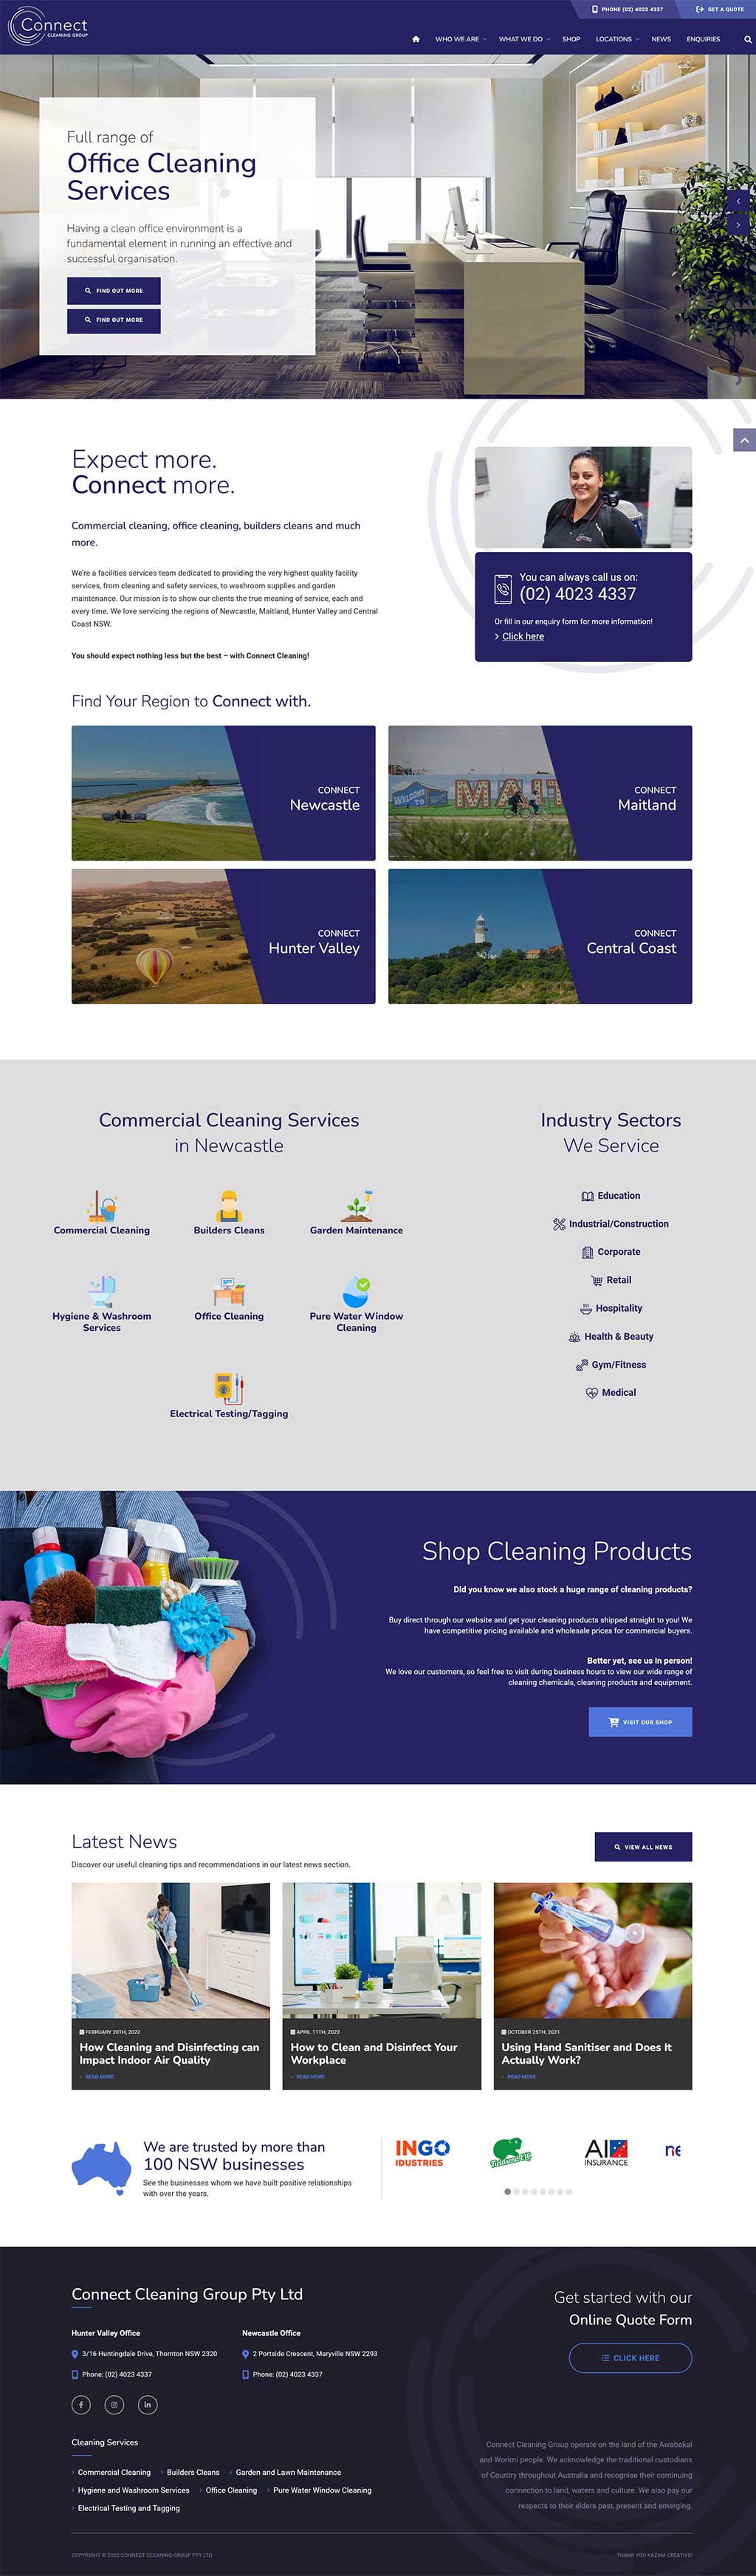 Website Design Client - Connect Cleaning Group